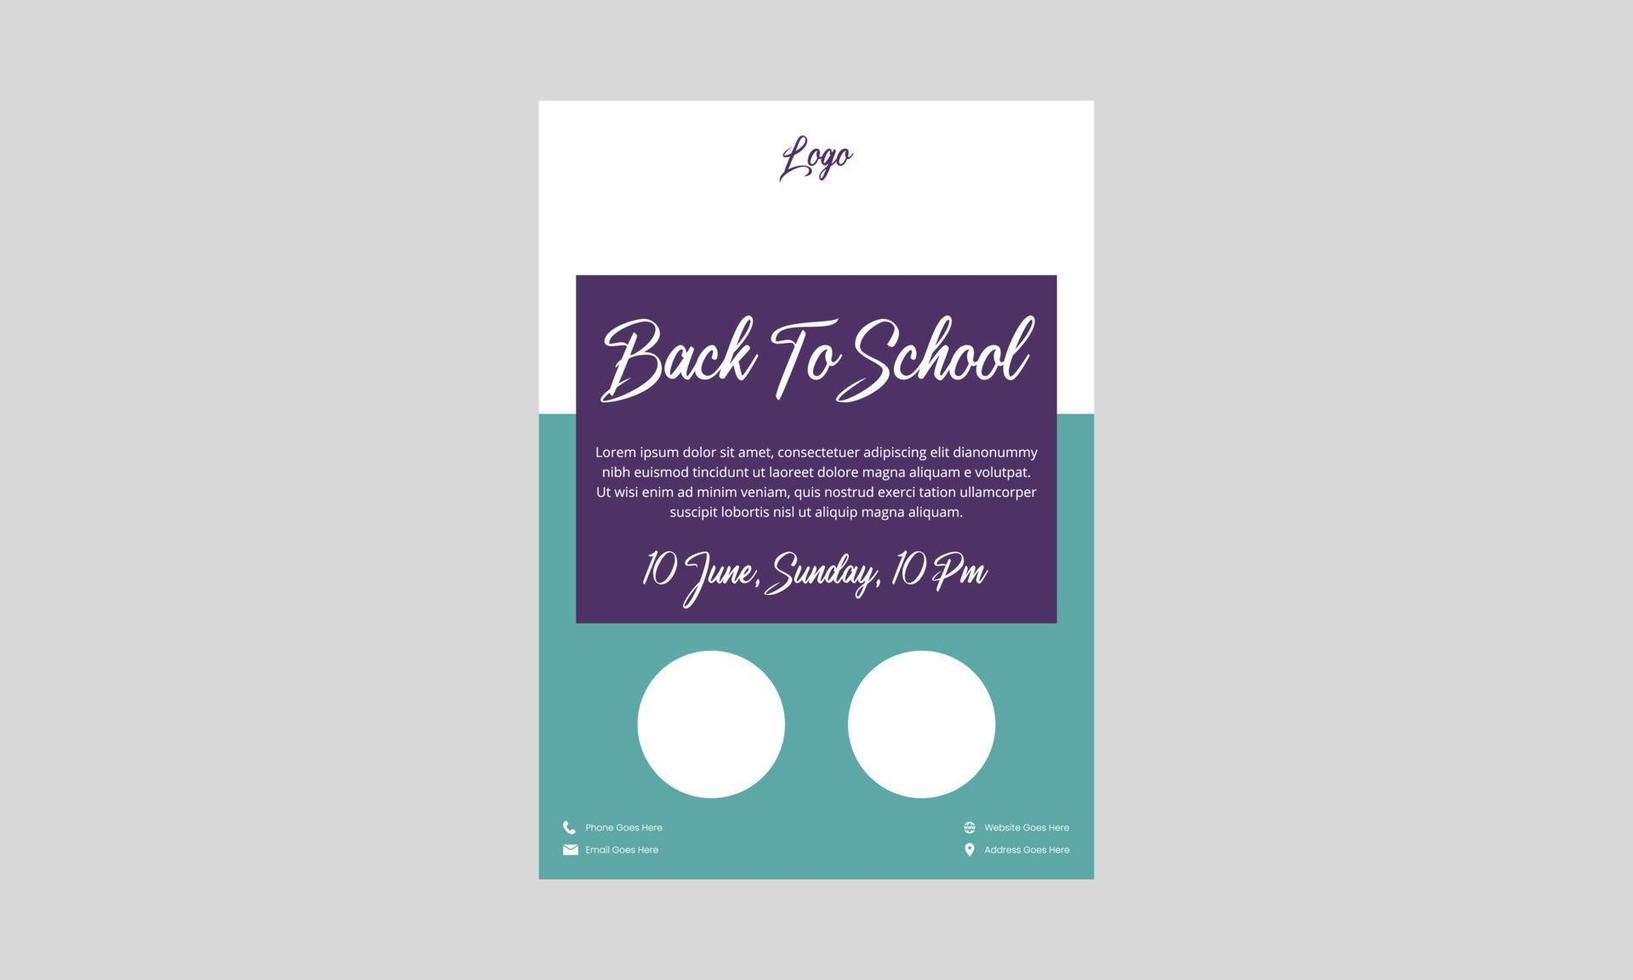 back to school flyer design template. creative back to school flyer design. school flyer design with date and text. vector